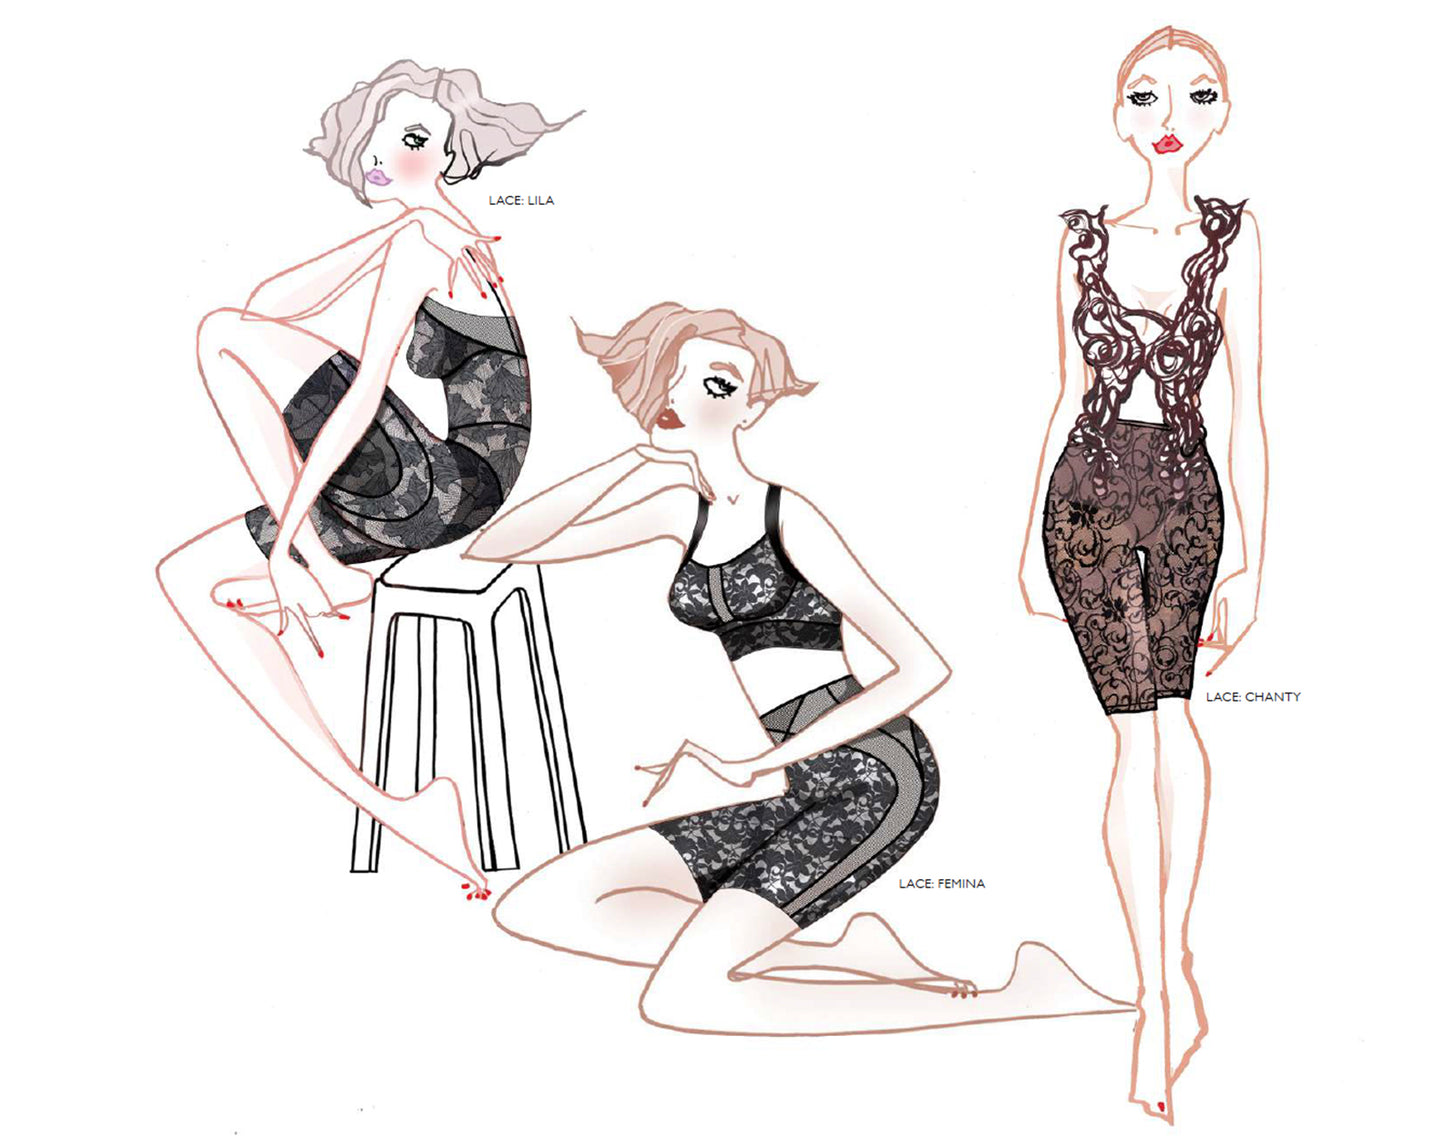 Design Concepts SS24 Lingerie & Loungewear - YEAR SUBSCRIPTION